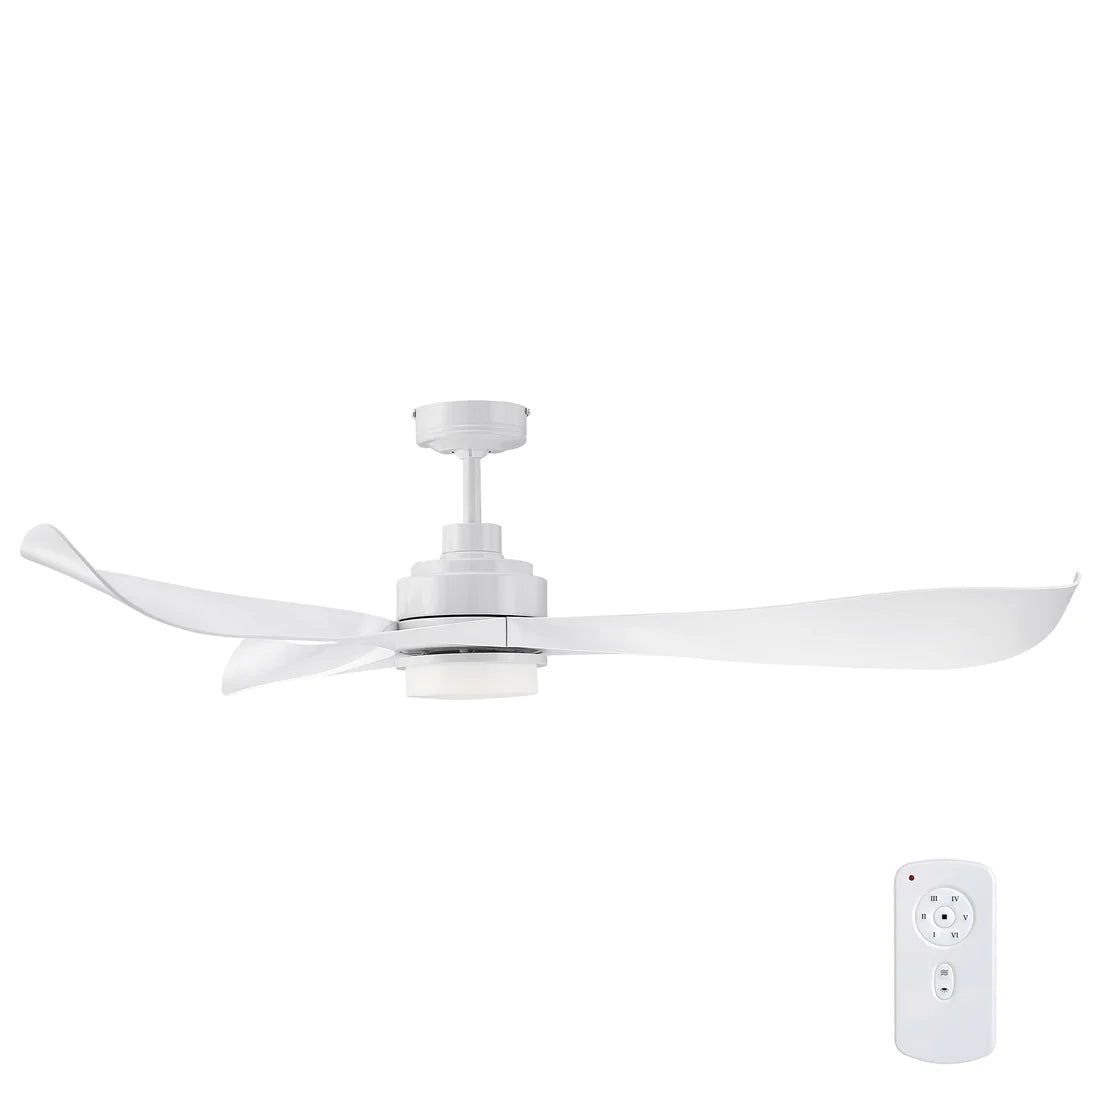 Mercator Eagle DC Ceiling Fans With LED Light And Remote White - Mases LightingMercator